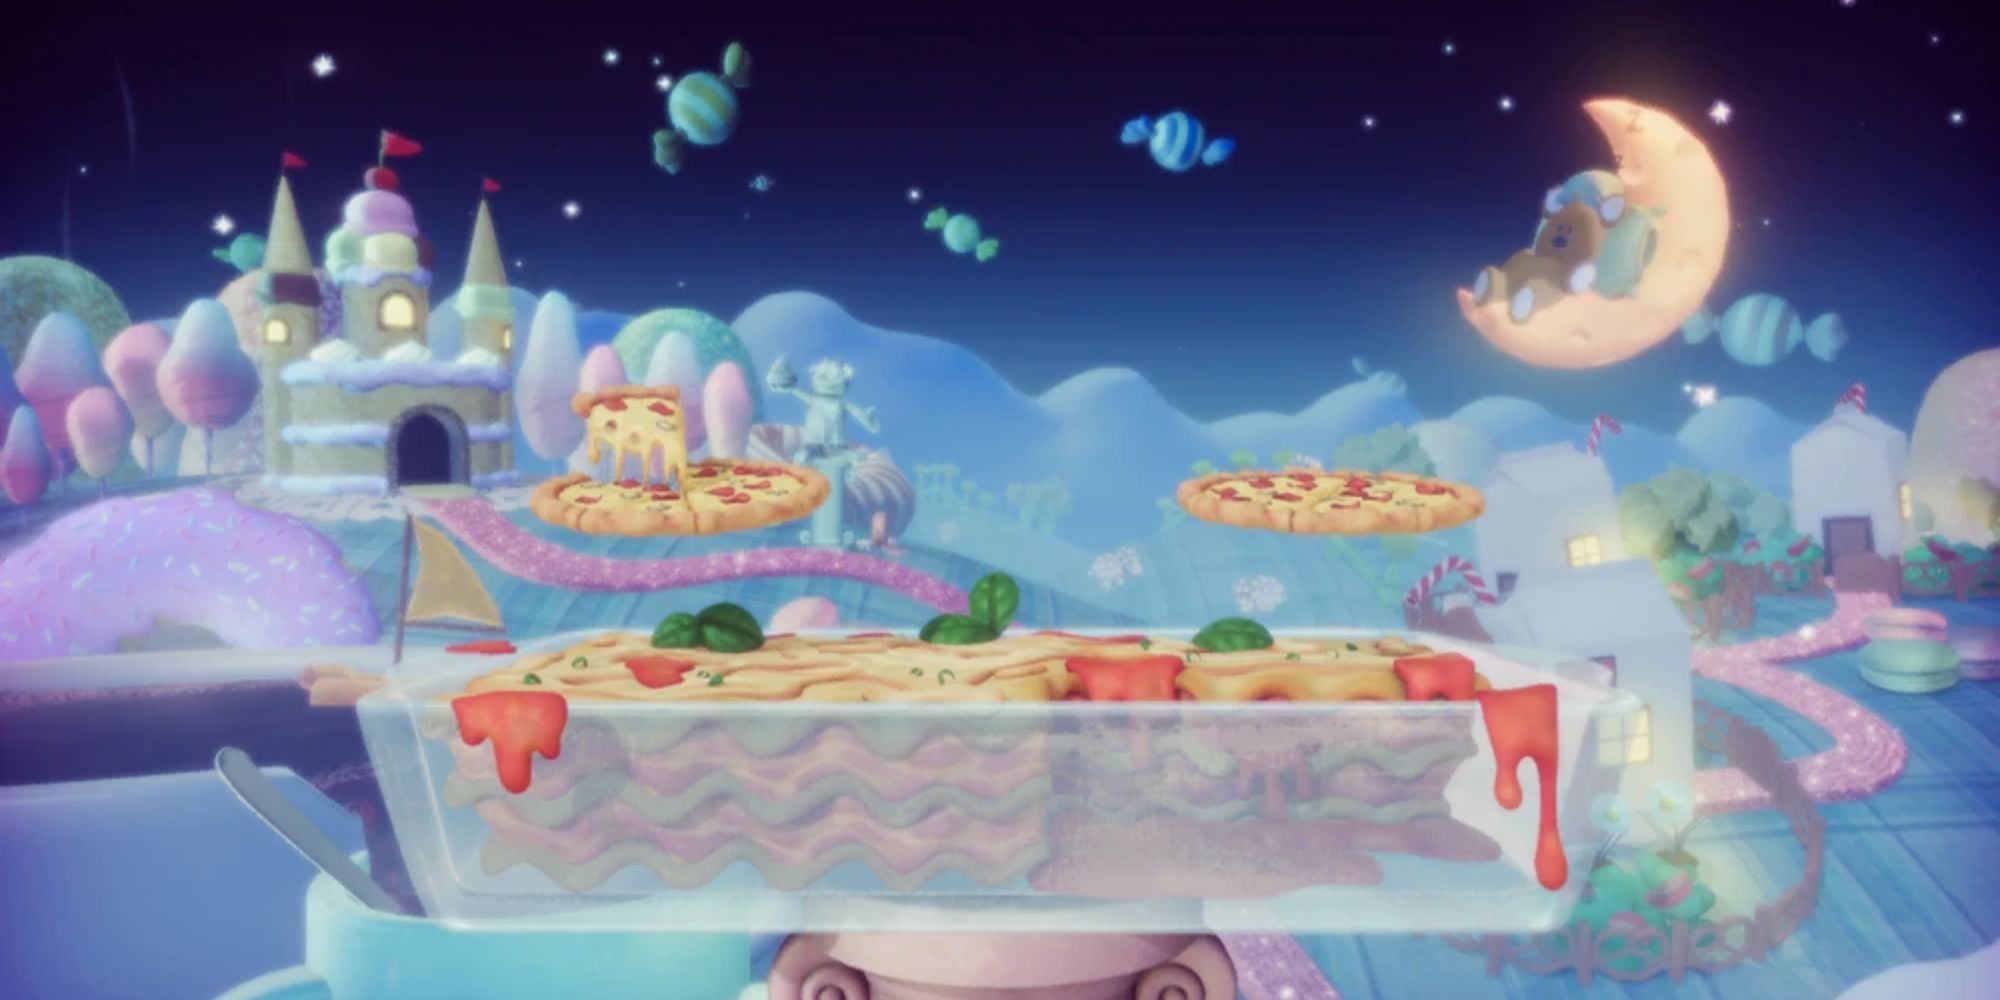 Sweet Dreams Pizza and Lasagna float in the night sky